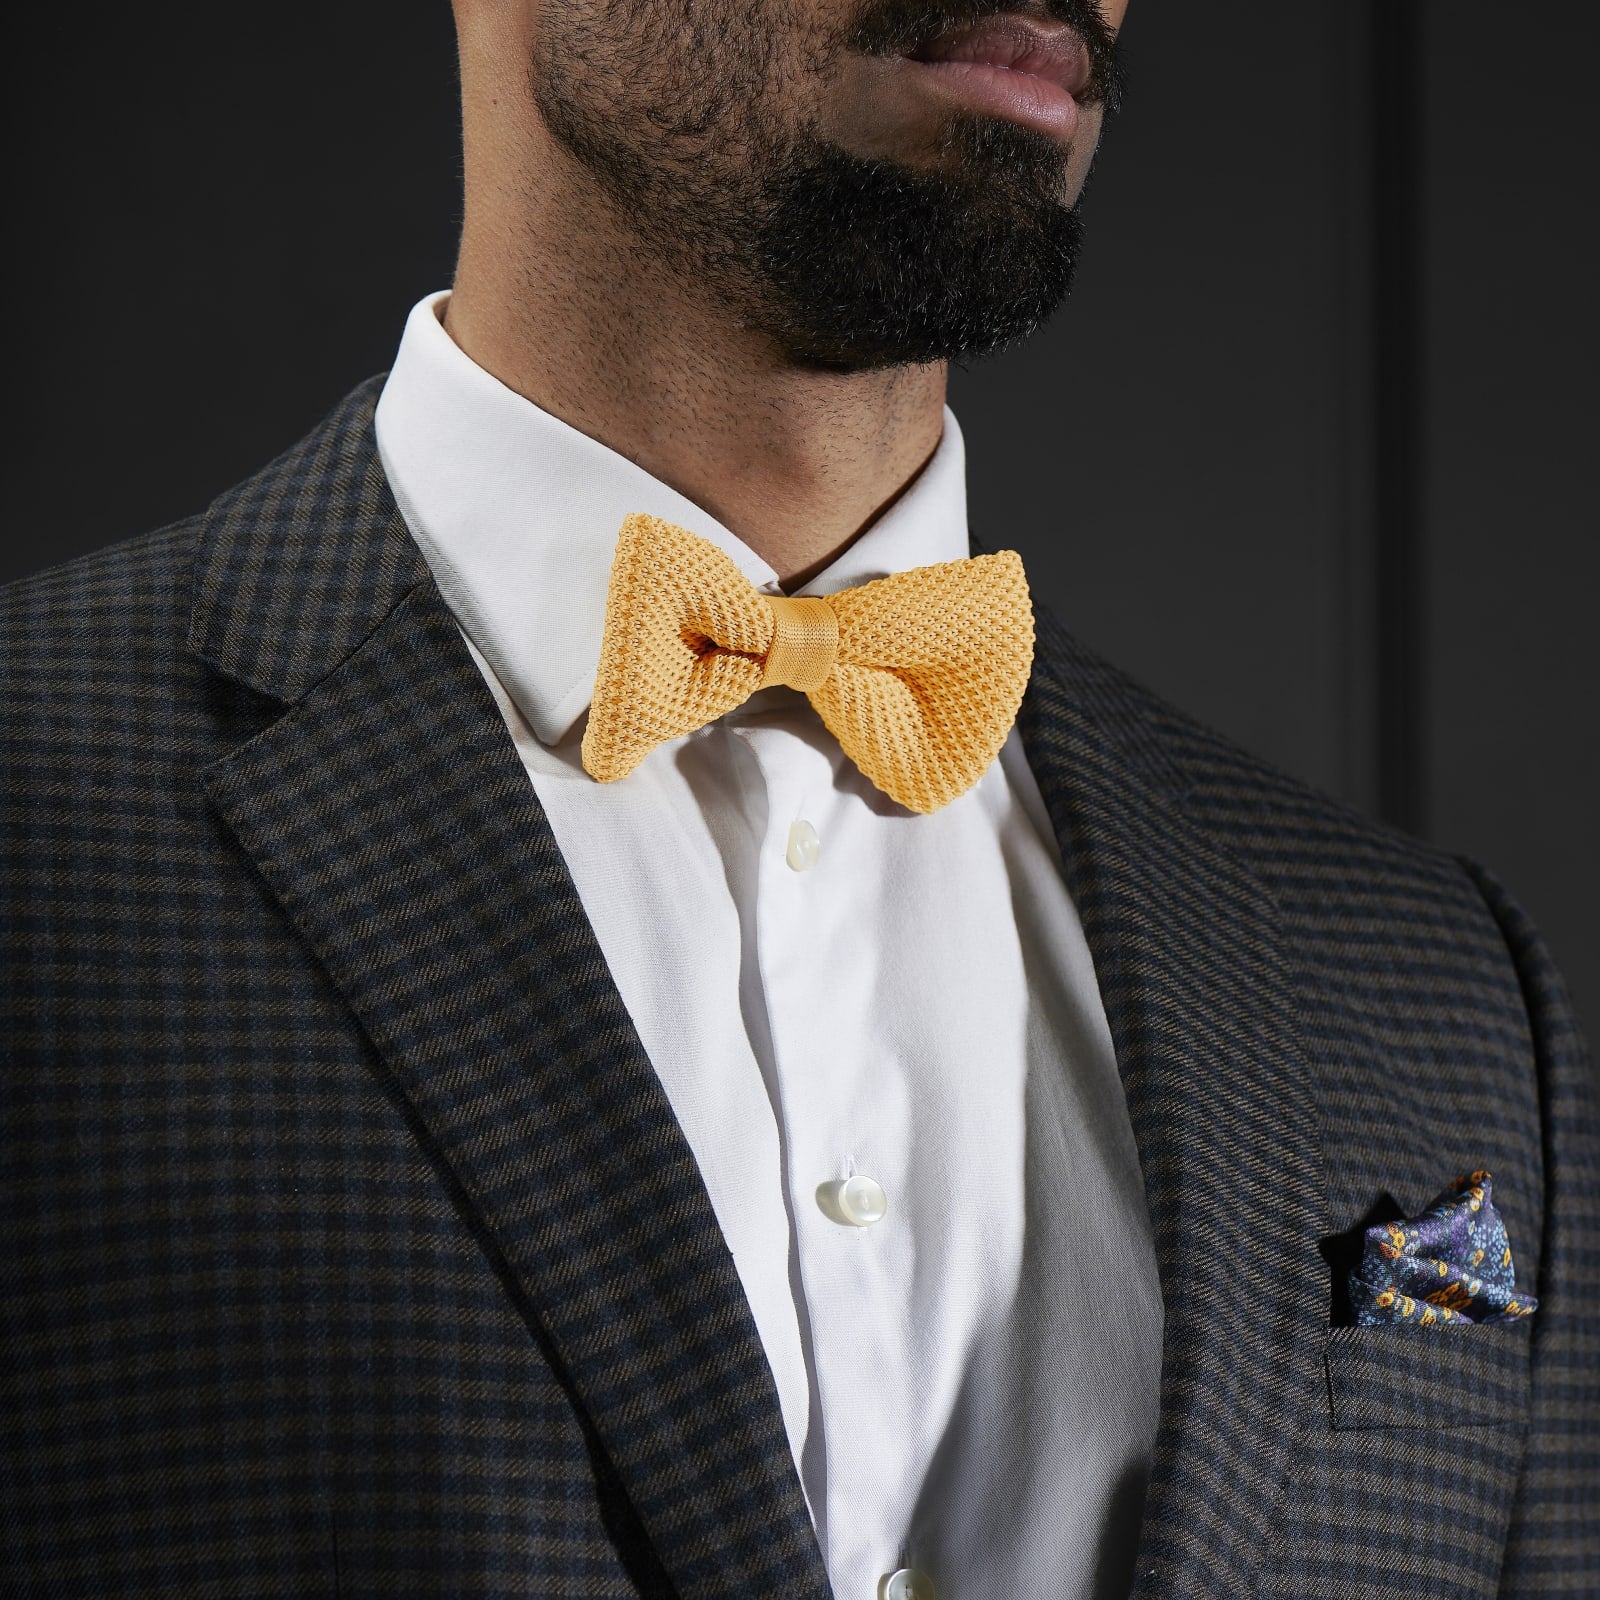 CREAM KNITTED BOW TIES